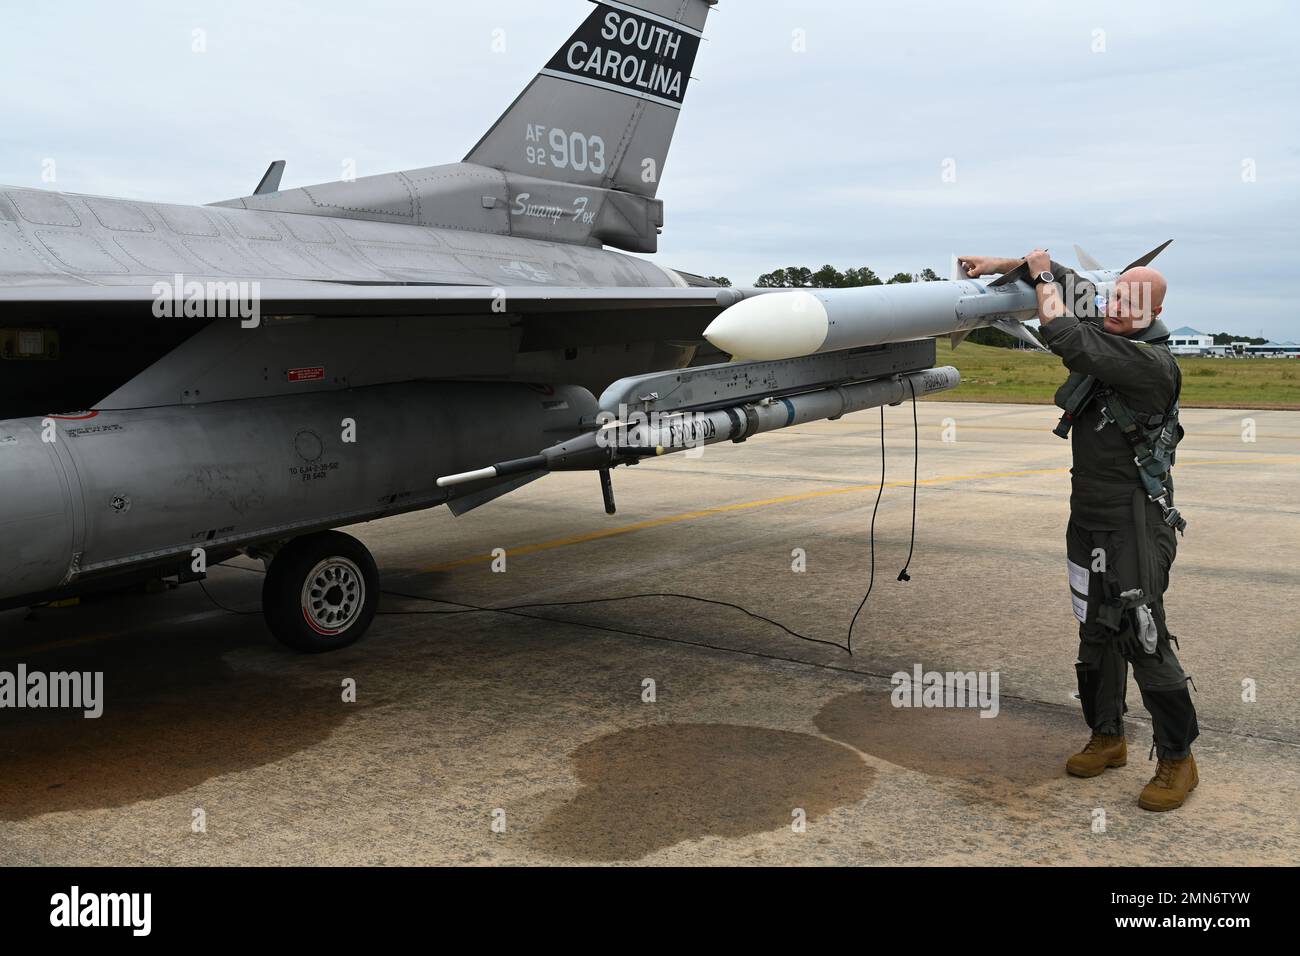 U.S. Air Force Lt. Col. David Anderson, 157th Fighter Squadron pilot, prepares a F-16 fighter jet from the South Carolina Air National Guard’s 169th Fighter Wing to depart Columbia Metropolitan Airport in West Columbia, South Carolina to an alternate airfield September 29, 2022. The temporary relocation is a safety precaution ahead of the anticipated arrival of Hurricane Ian. The aircraft will return to South Carolina and resume their normal flight training operations just as soon as conditions allow. Stock Photo